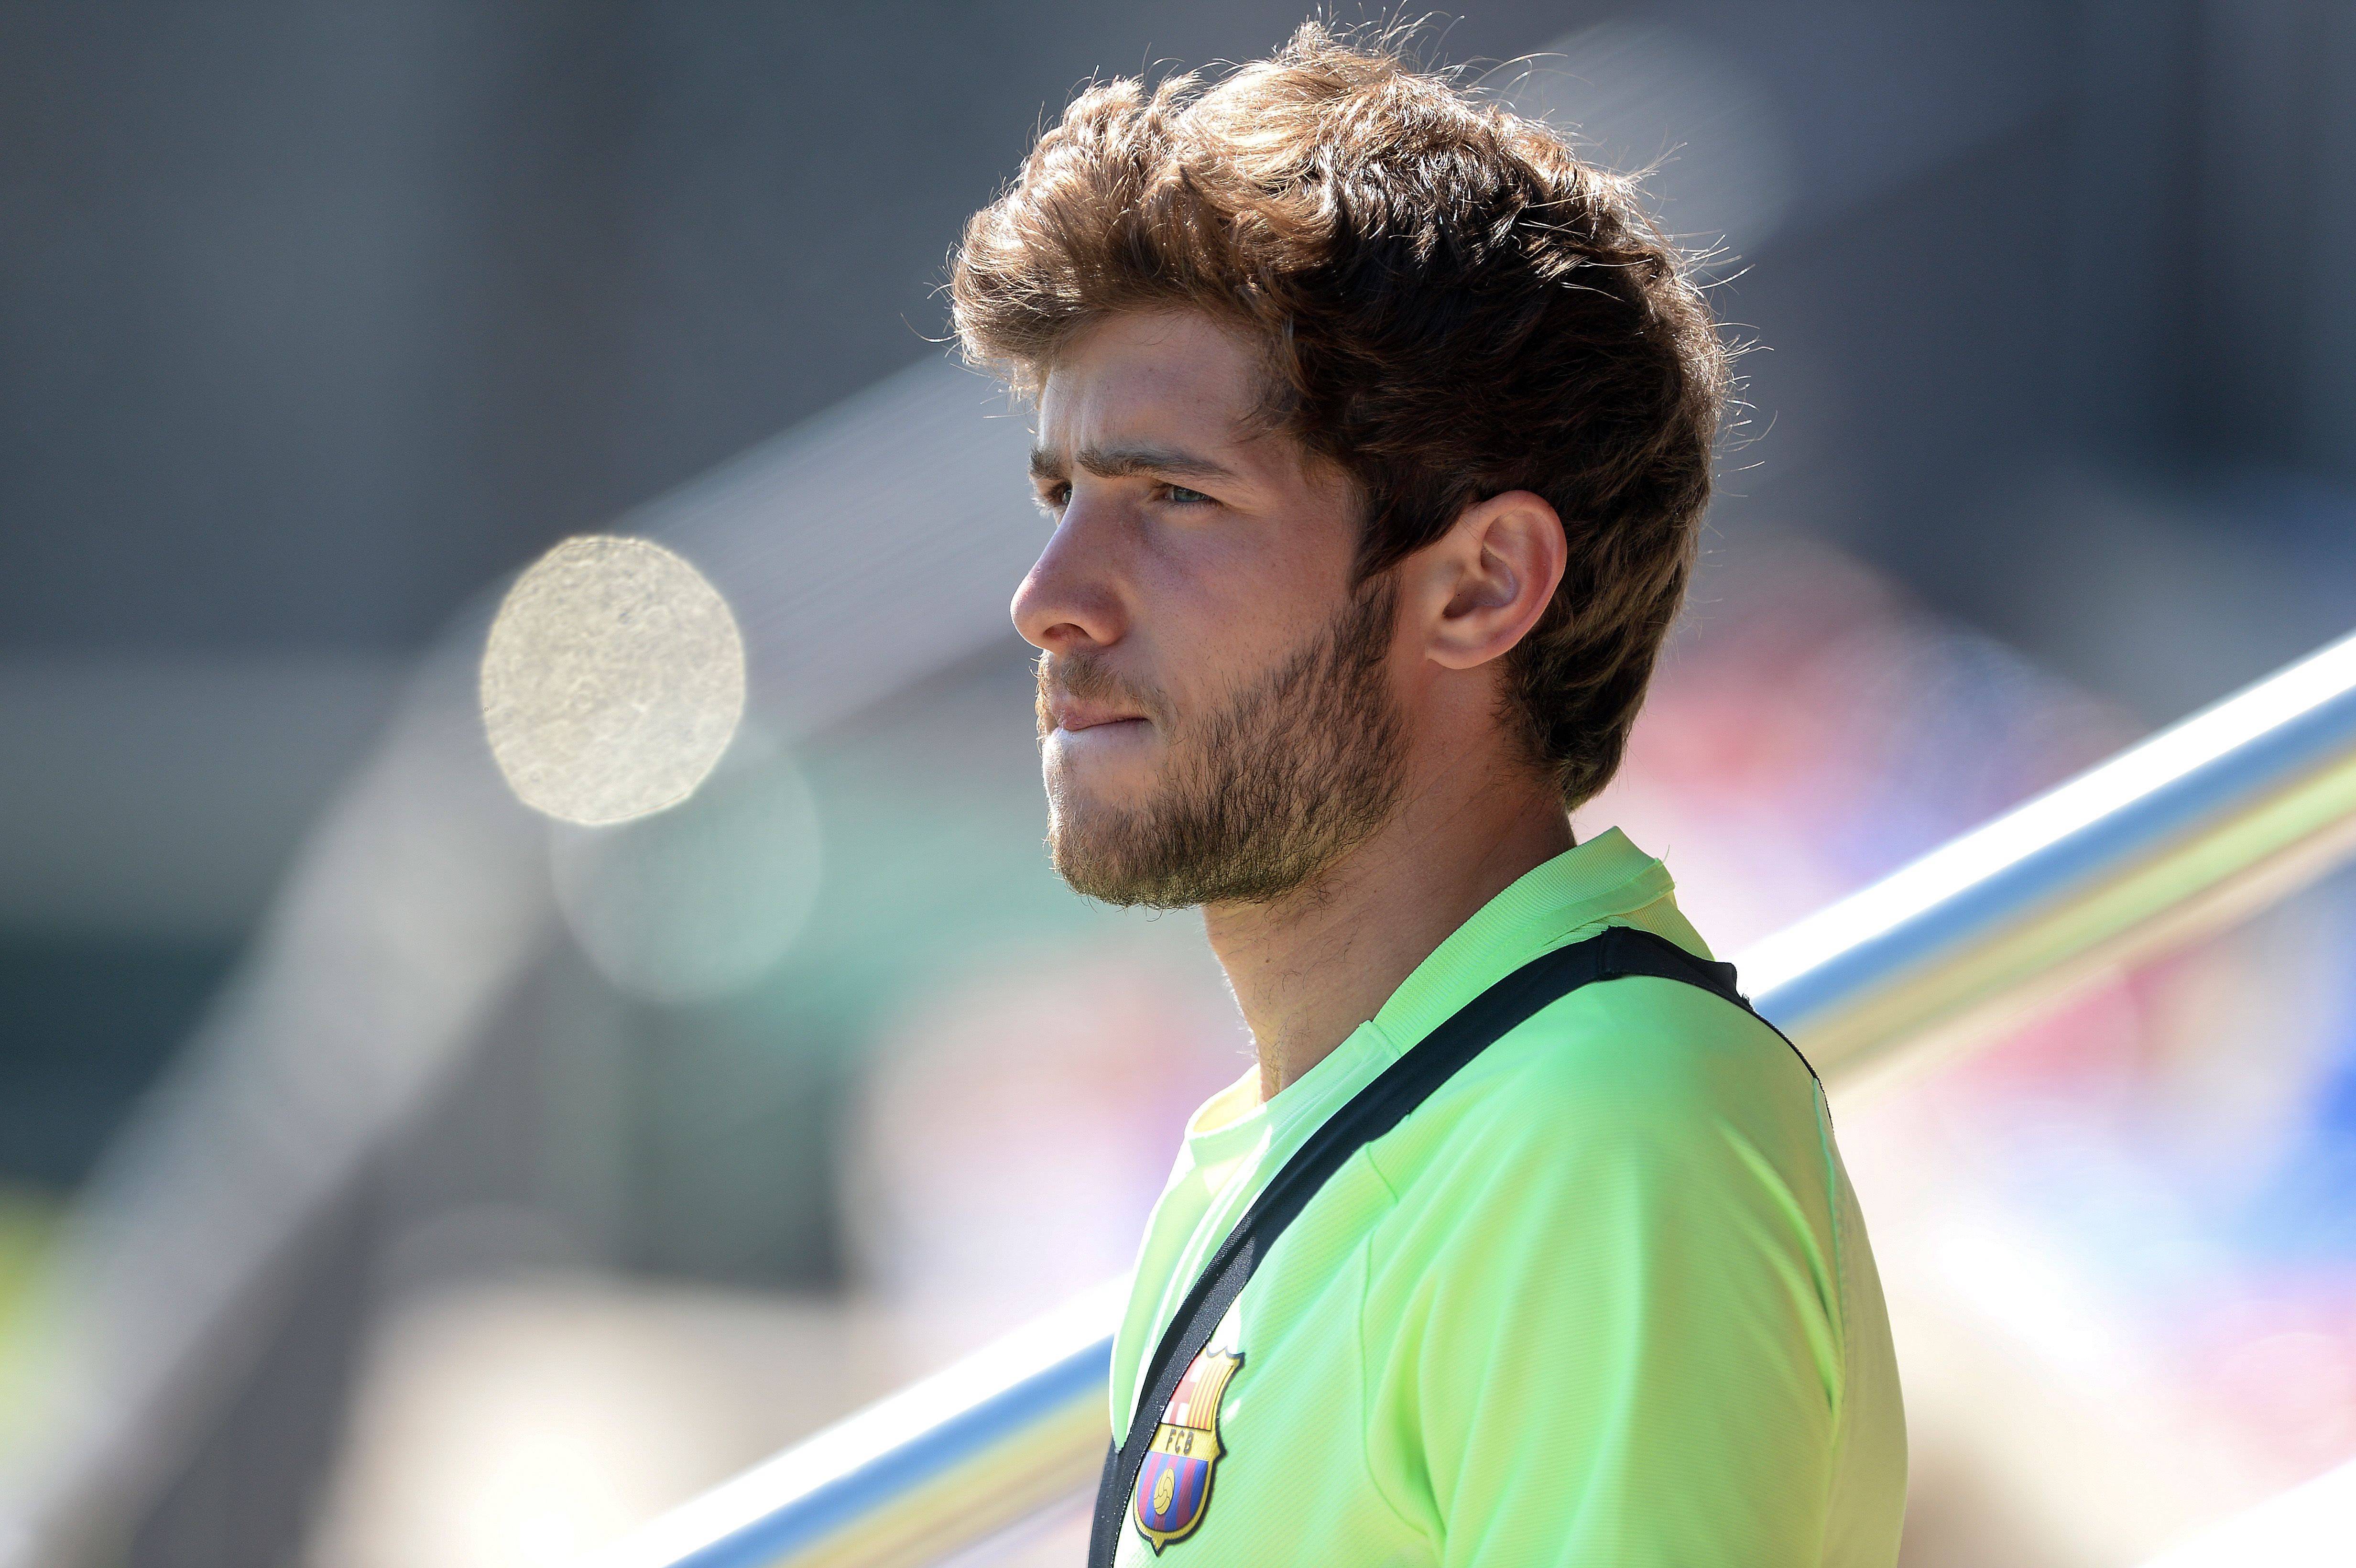 Barcelona's midfielder Sergi Roberto looks on as he arrives for a training session at the Sports Center FC Barcelona Joan Gamper in Sant Joan Despi, near Barcelona on May 20, 2017 on the eve of their last Spanish League football match FC Barcelona vs SD Eibar / AFP PHOTO / Josep LAGO        (Photo credit should read JOSEP LAGO/AFP/Getty Images)